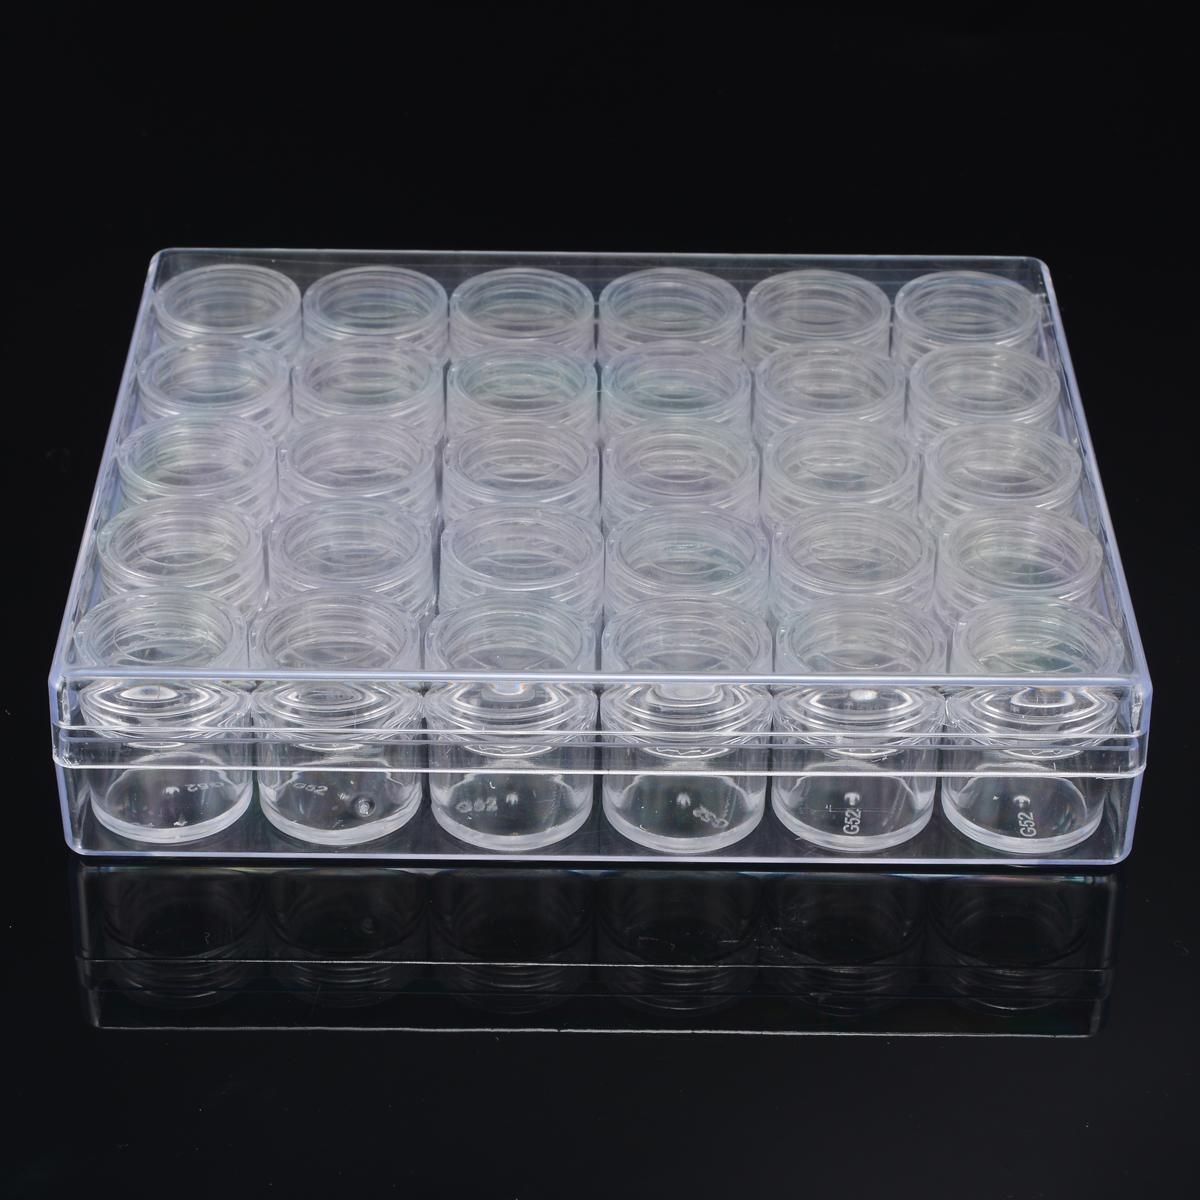 30 PCs Jewelry Strorage Box Acrylic Japan Style Transparent Embroidery Painting Organizer Containers Rings Nail Small Round Jars